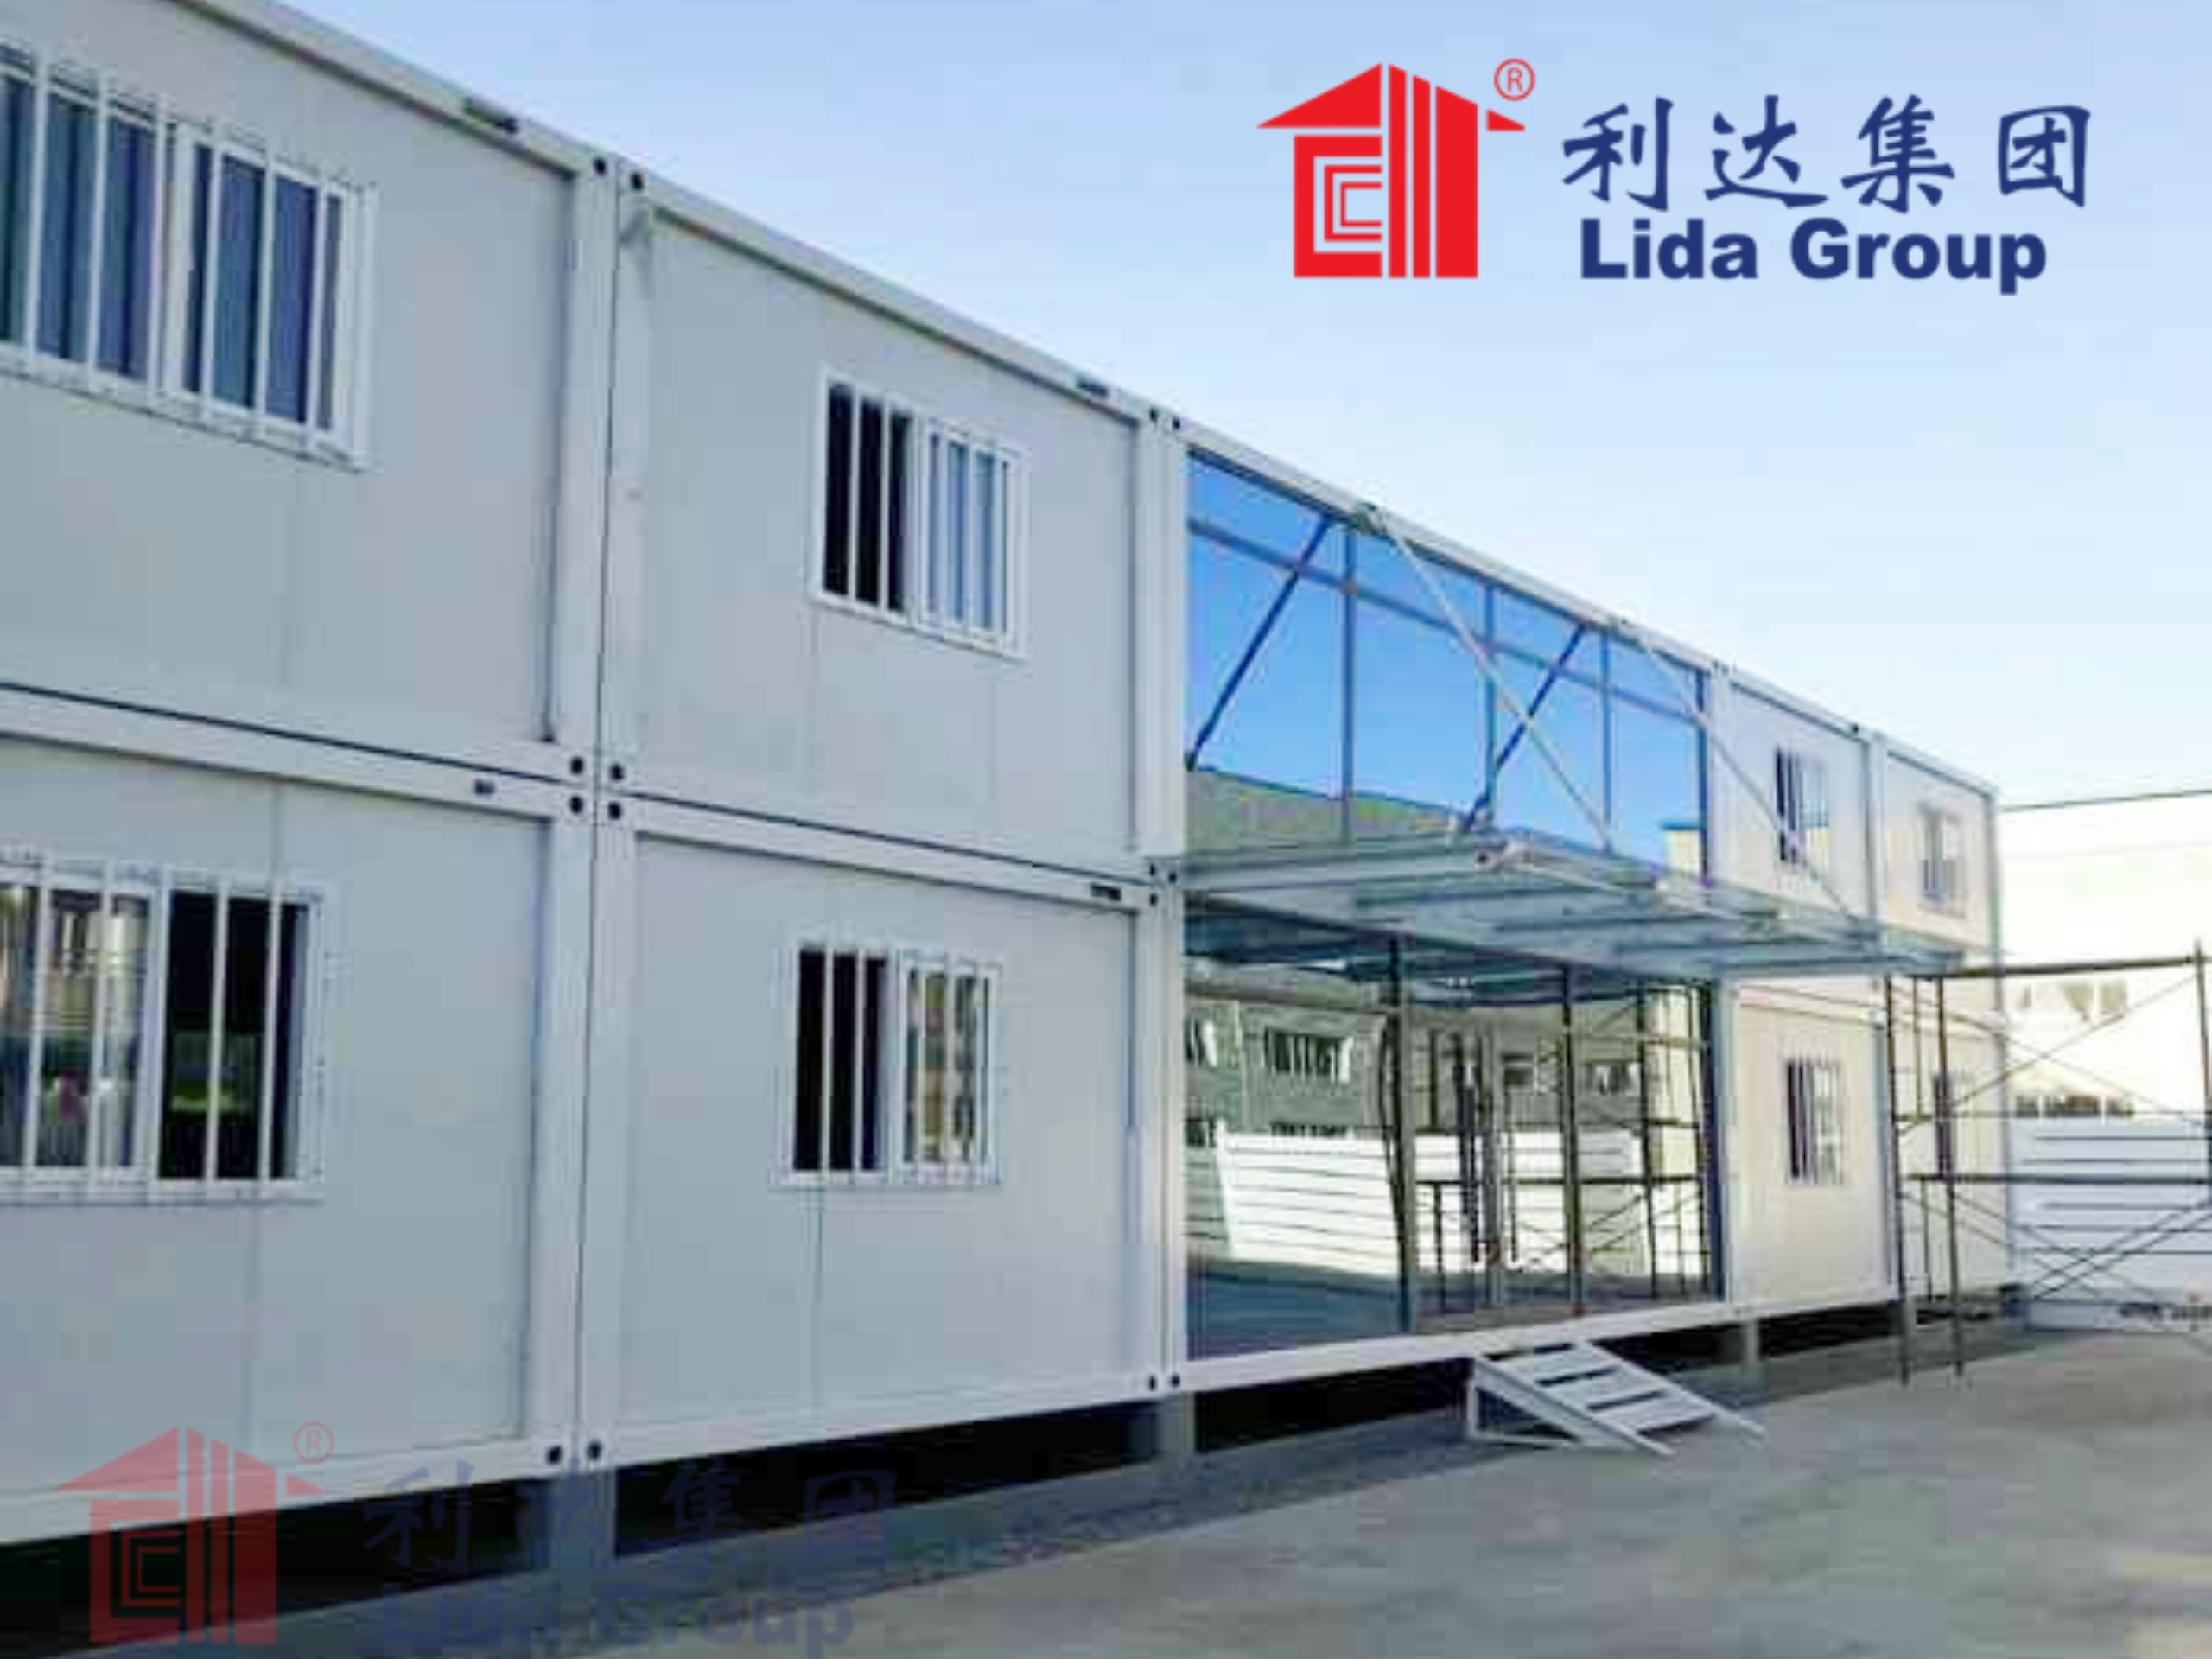 Ikea Partners With Modular Builder Lida Group To Mass Produce Budget-Friendly Prefabricated Container Homes For Consumers